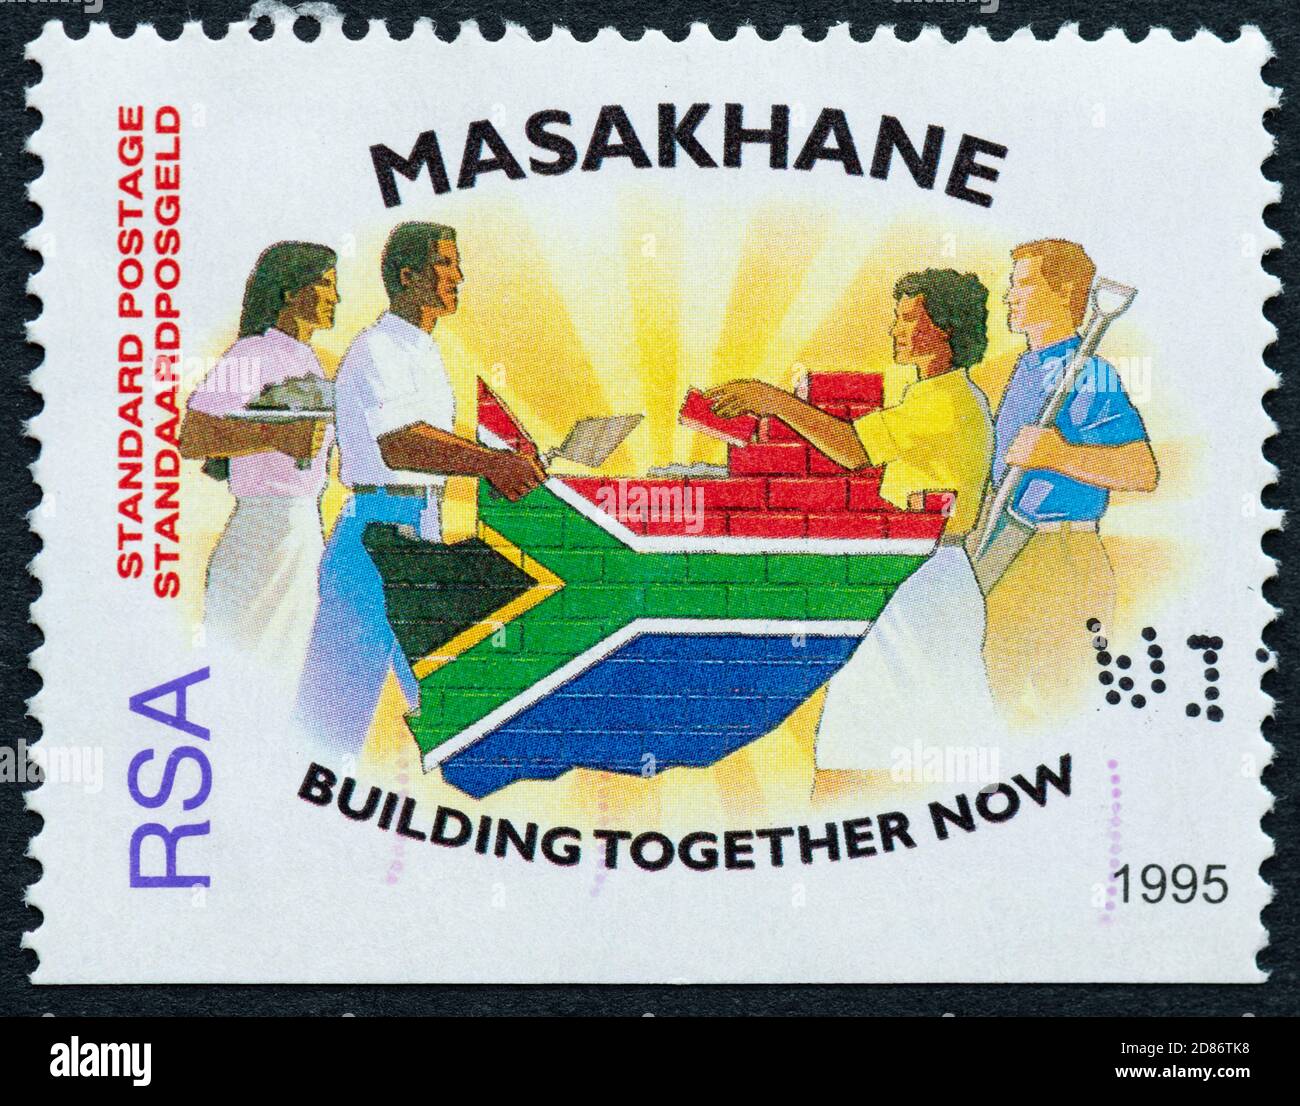 Masakhane campaign - RSA Republic of South Africa postage stamp issued 1995 Stock Photo